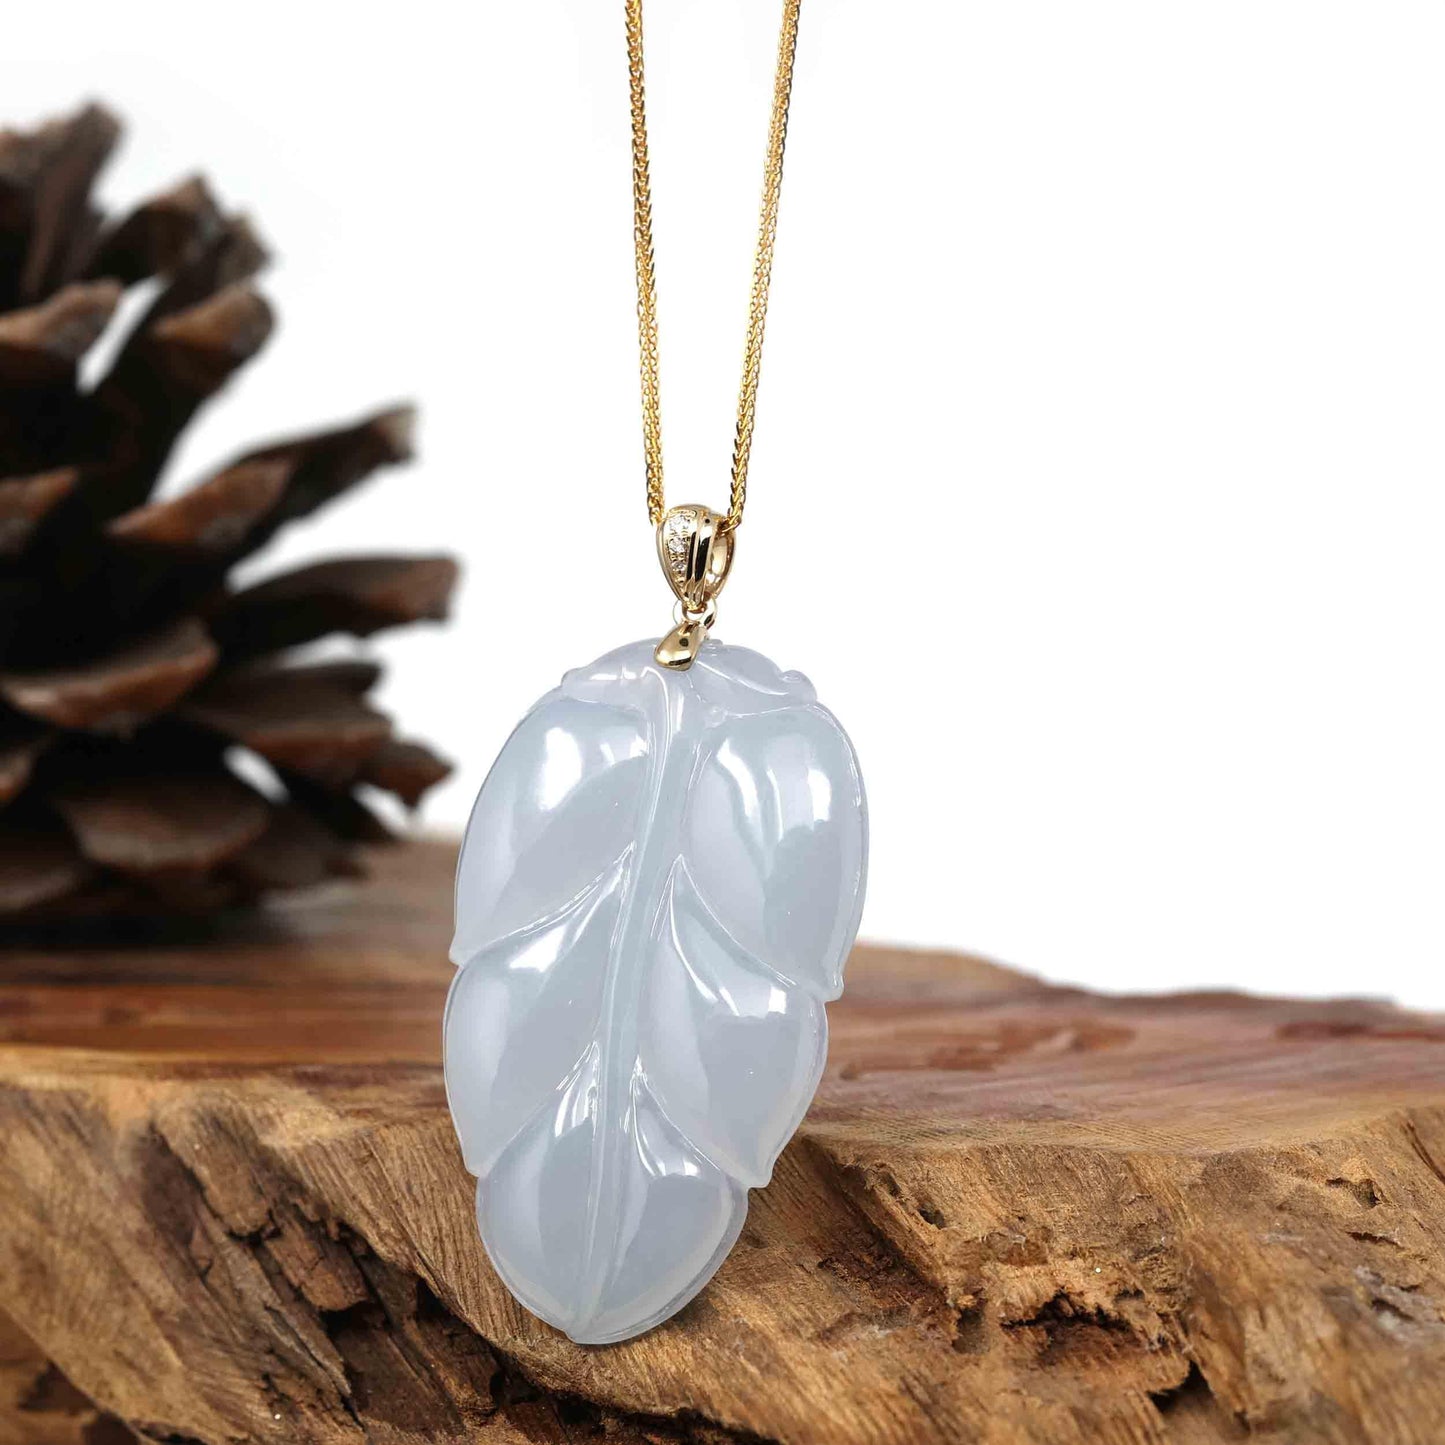 Load image into Gallery viewer, RealJade Co. Jade Guanyin Pendant Necklace  Genuine Ice Jadeite Jade Jin Zhi Yu Ye (Leaf) Necklace With White Gold VSI Diamond Bail
